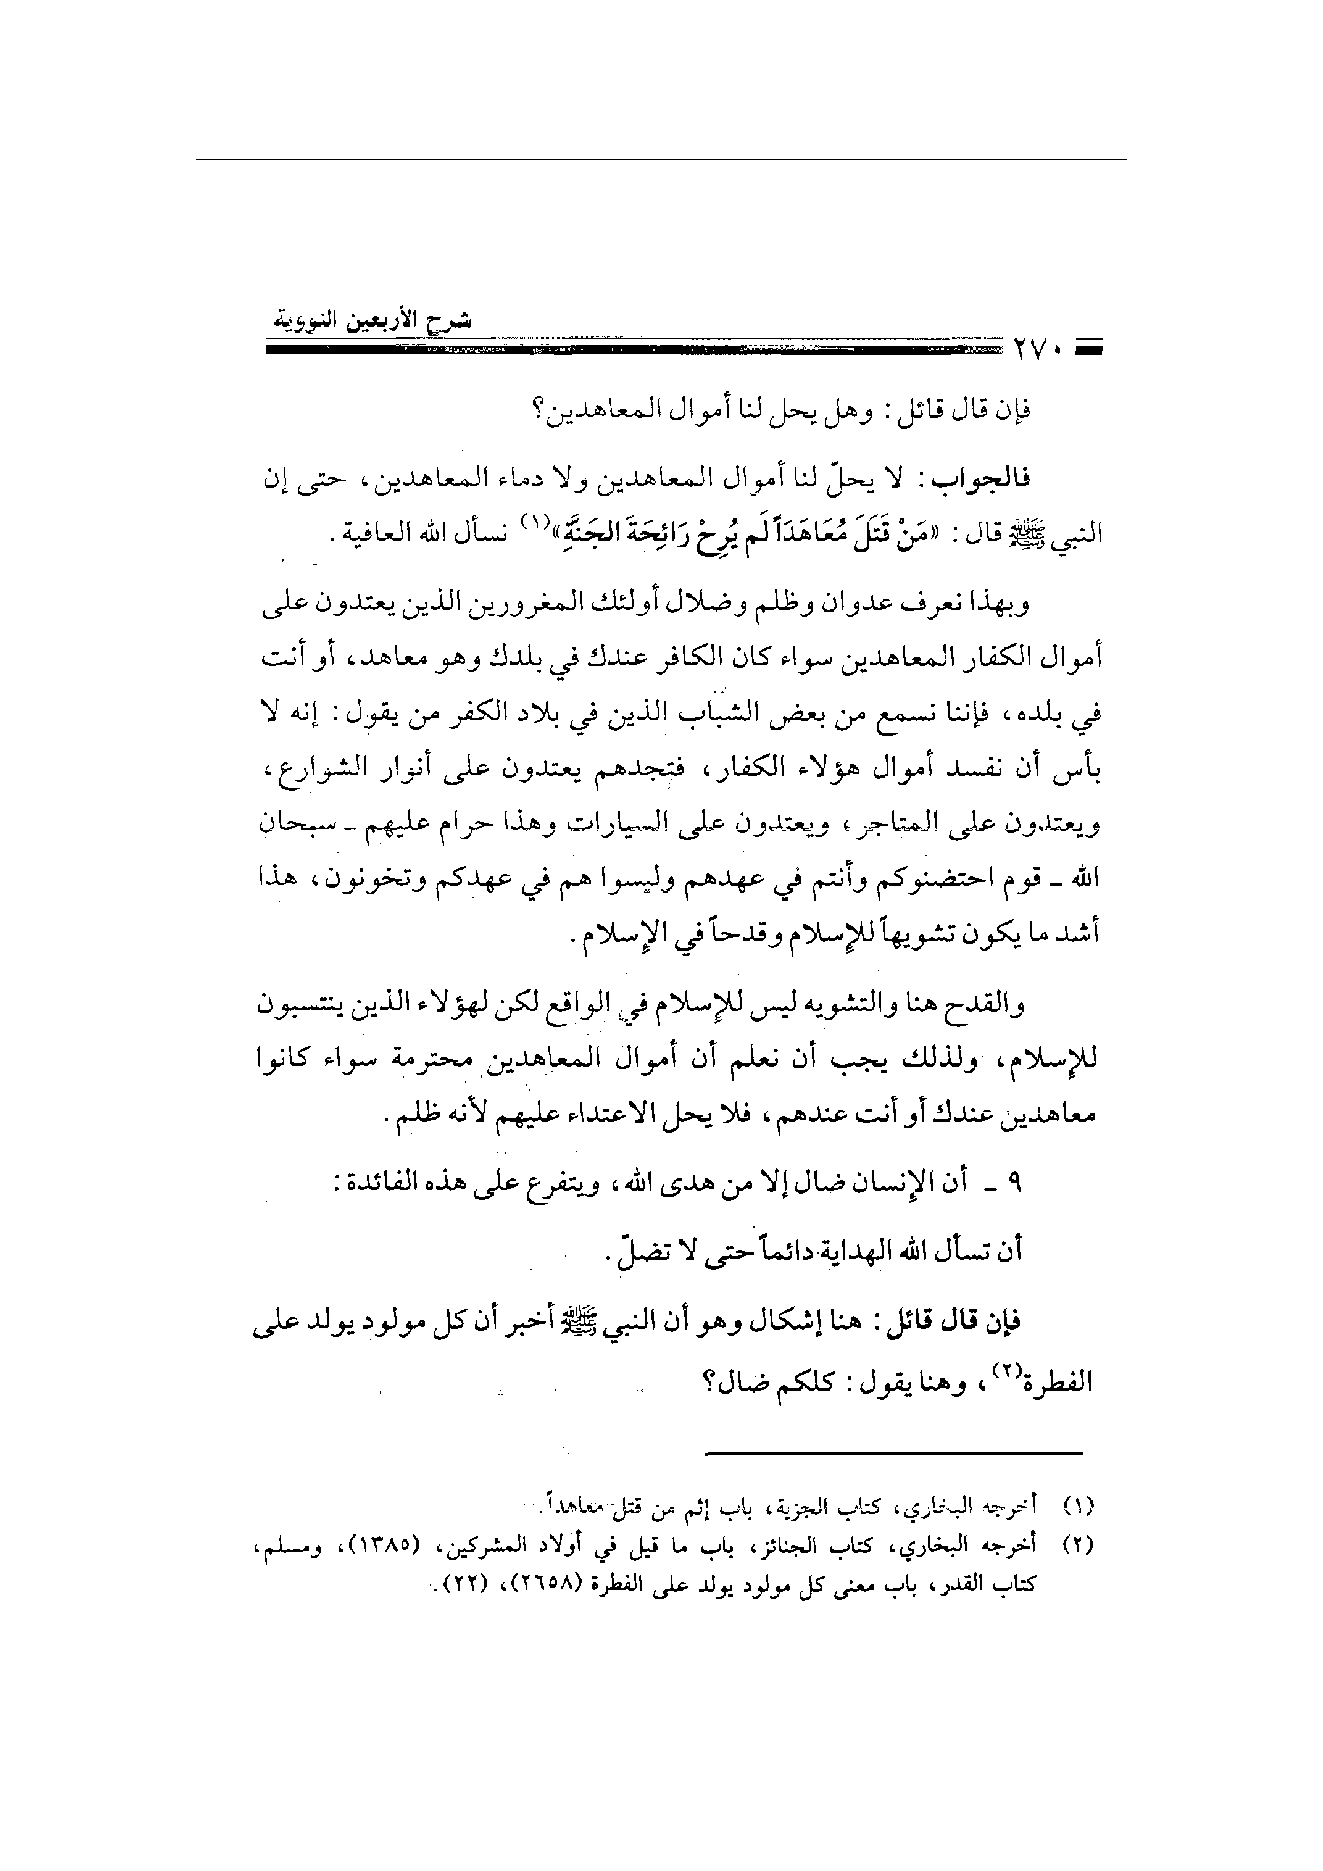 Page 270